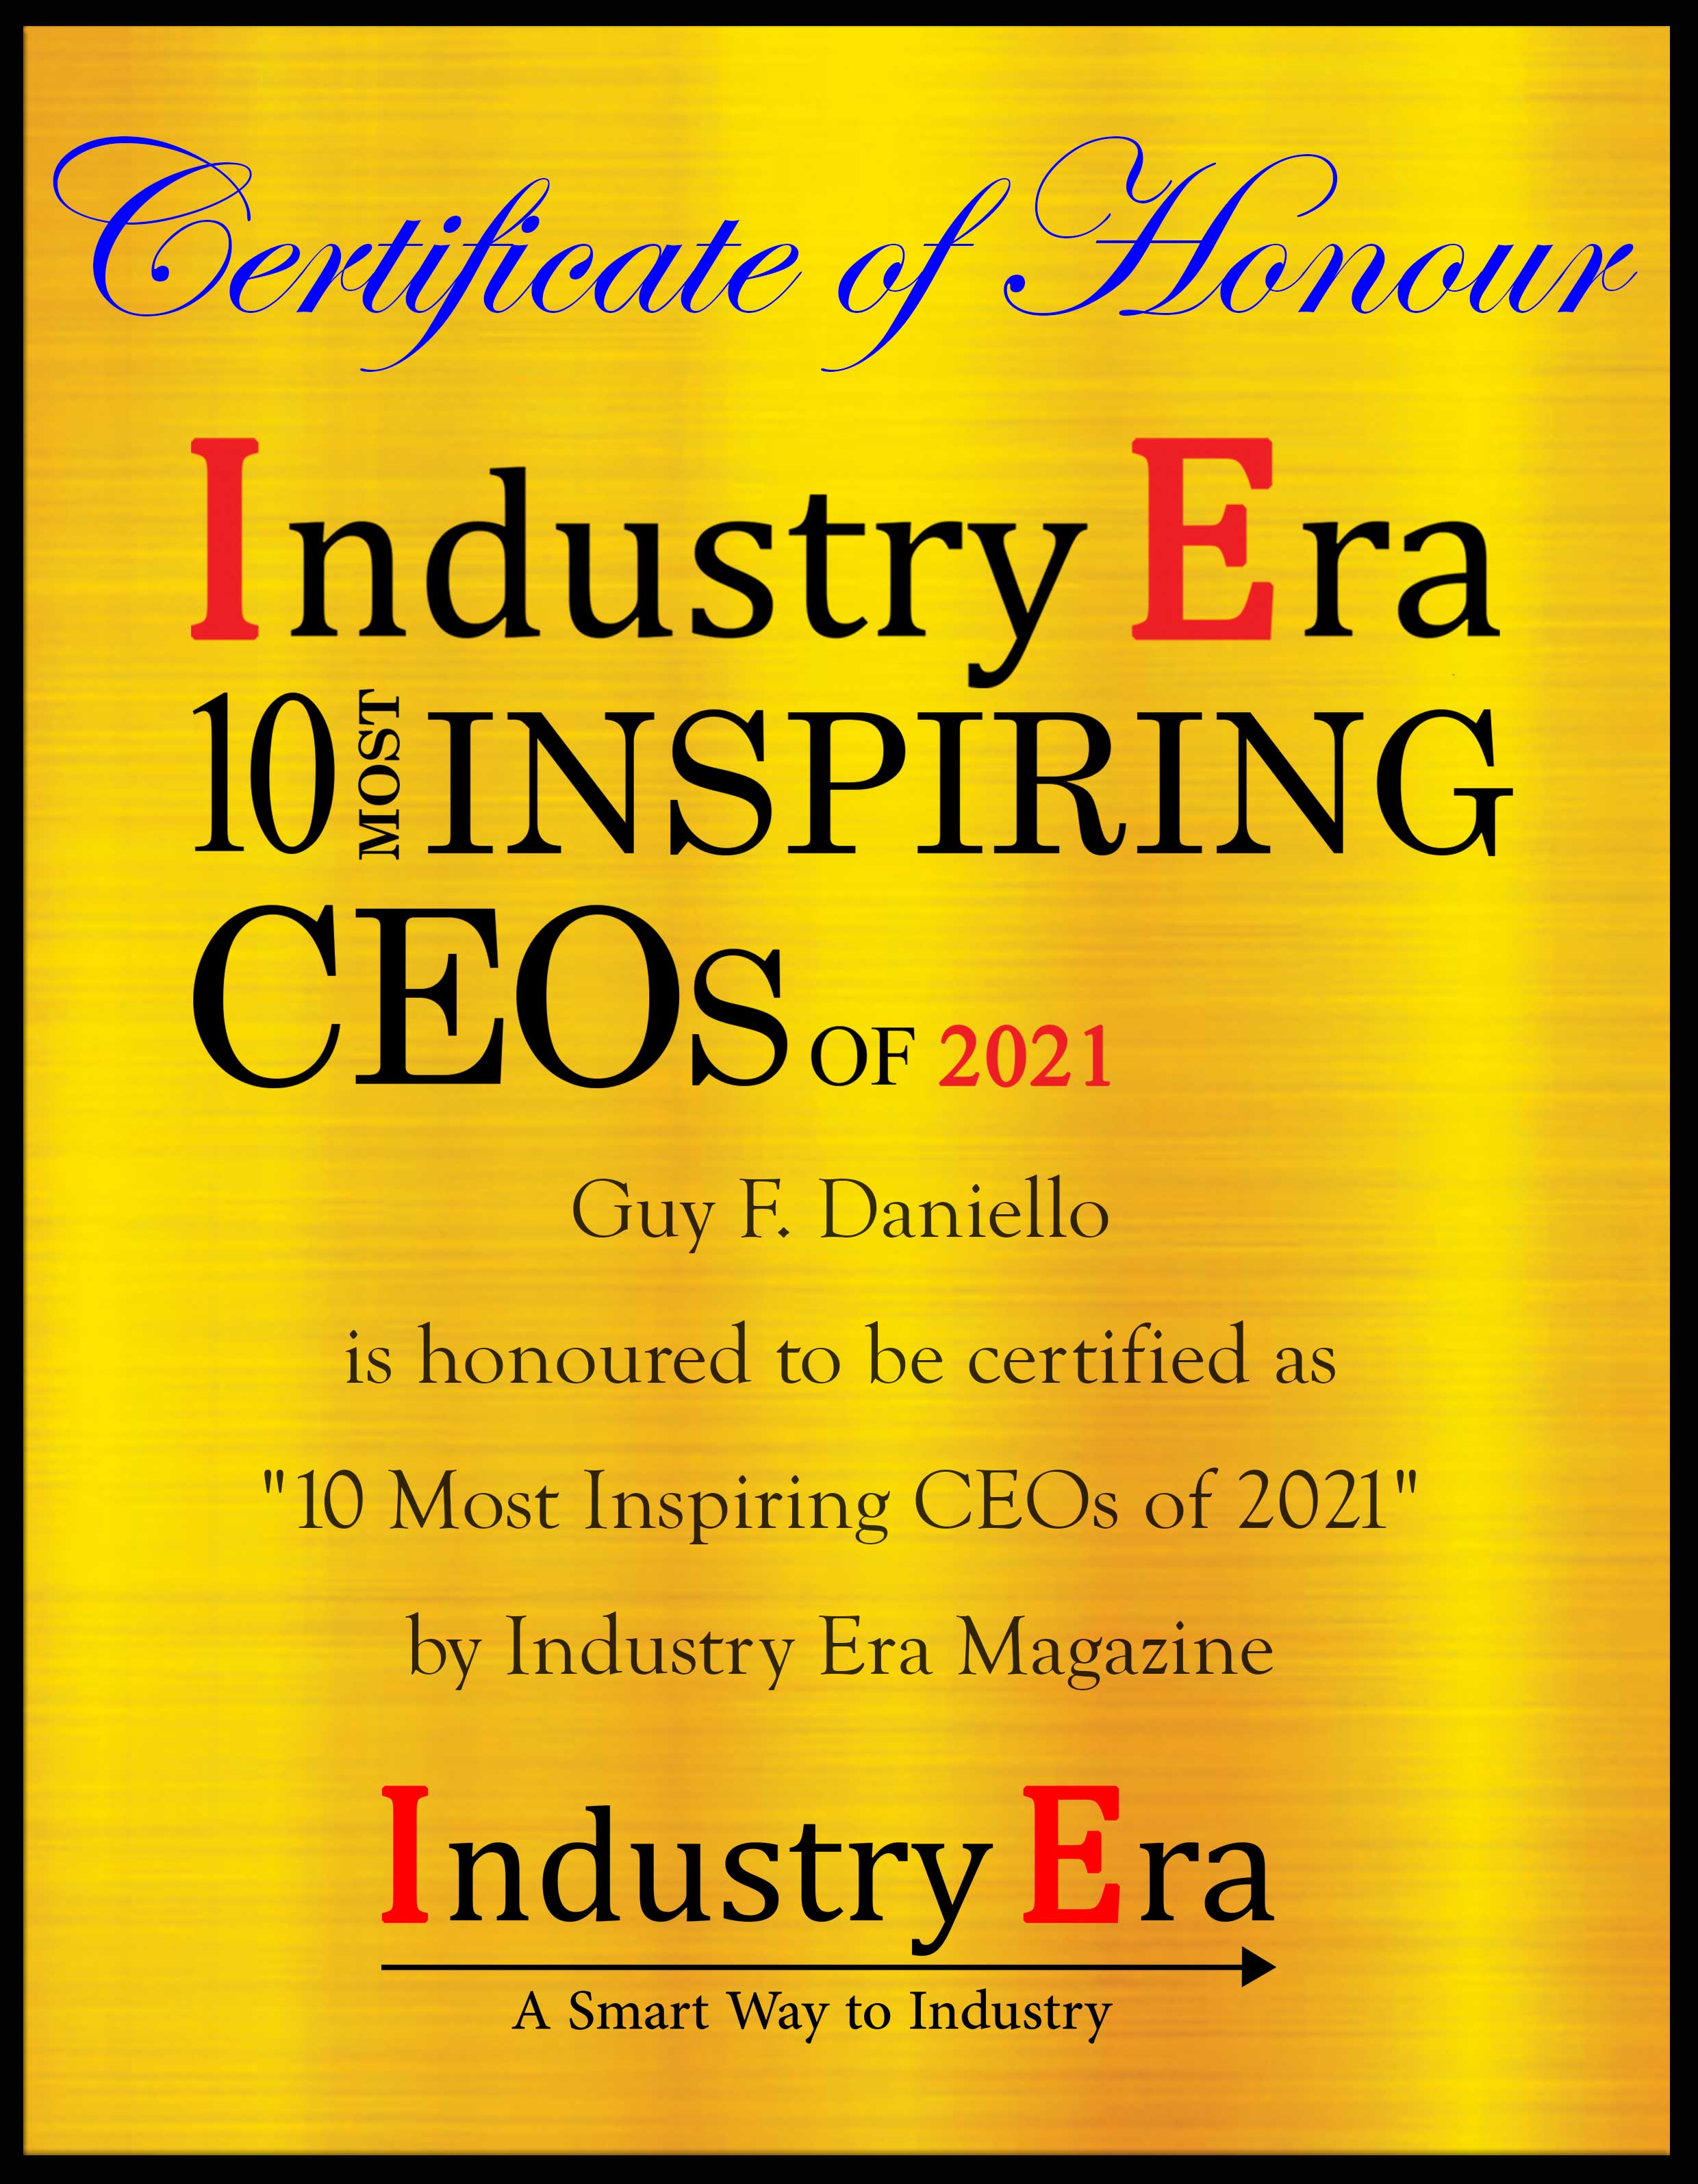 Guy F. Daniello, Chief Executive Officer & Founder of Peloton Consulting Group, Certificate